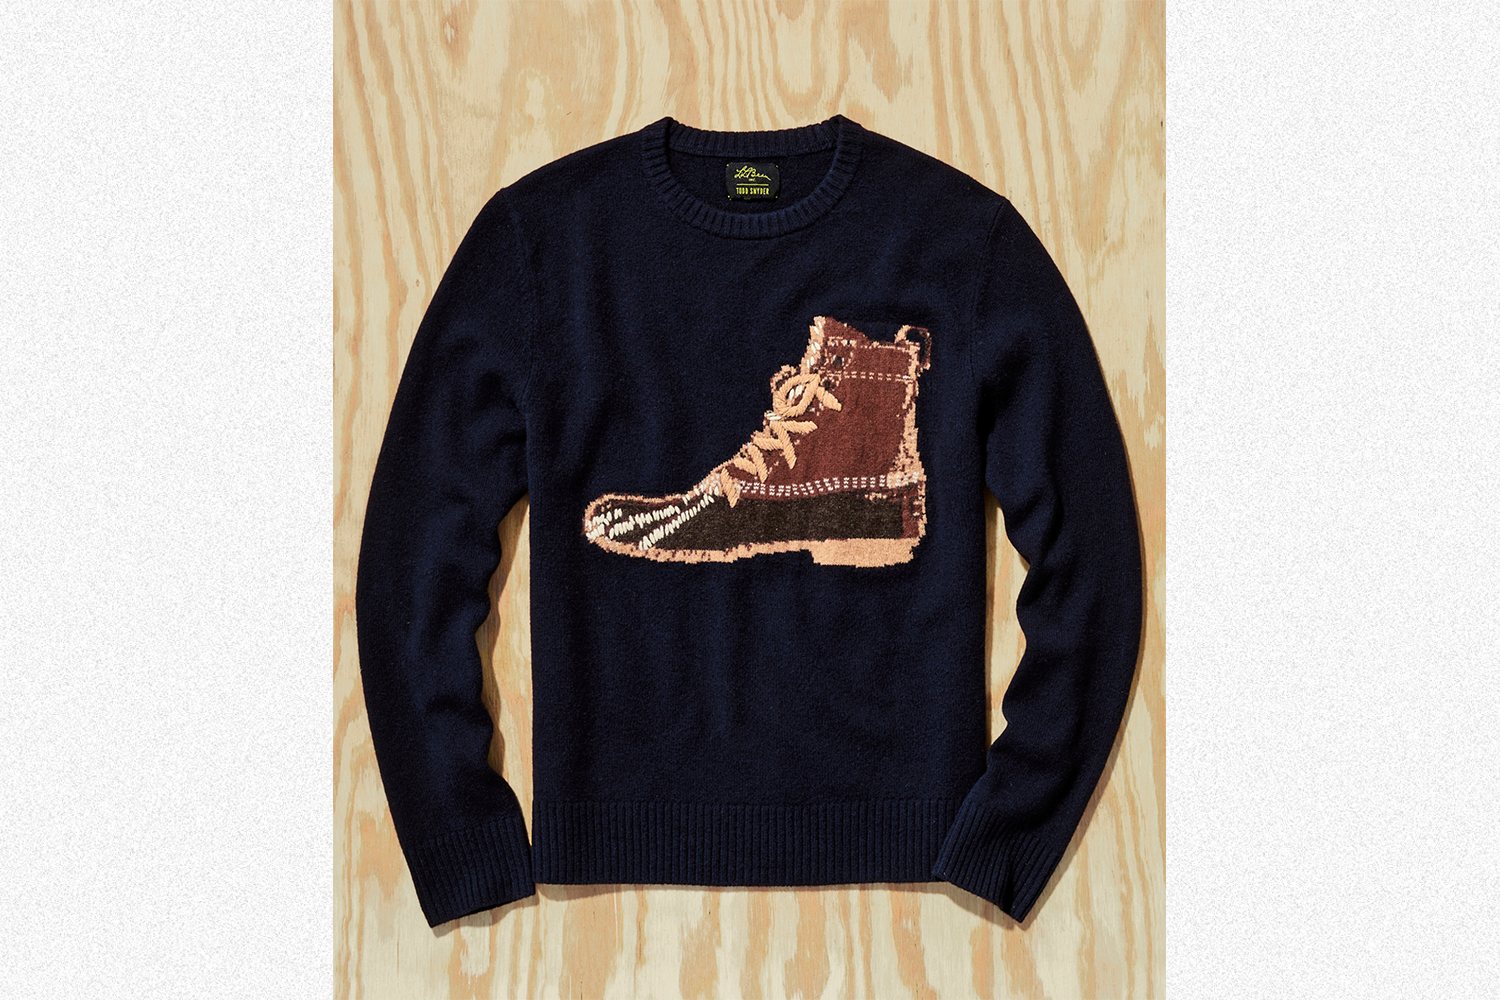 Todd Snyder x L.L.Bean Heritage Sweater in Navy